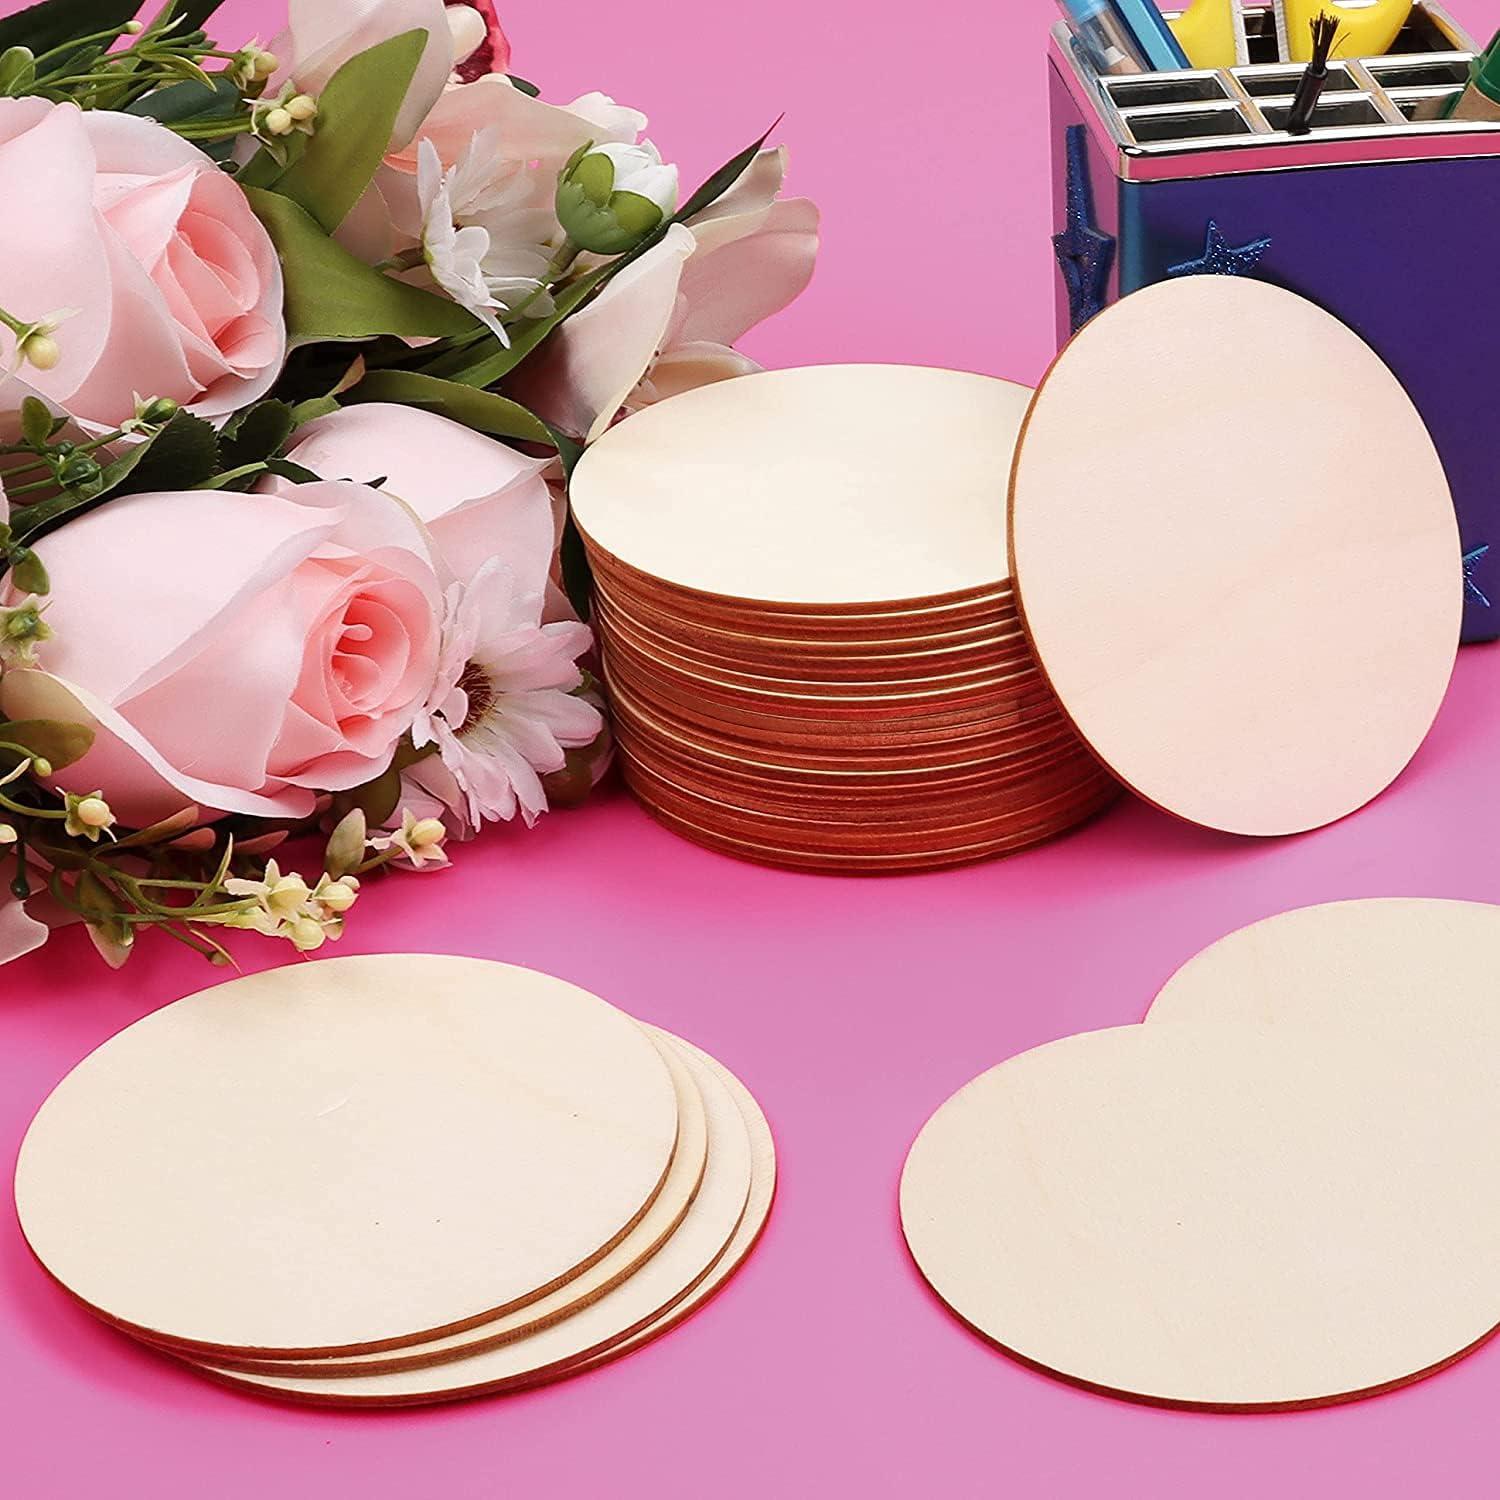 20 Pack 12 inch Wood Circles for Crafts, CertBuy Unfinished Wood Rounds Wooden Cutouts for Door Hanger, Painting Crafts, Door Design, Wood Burning, CH